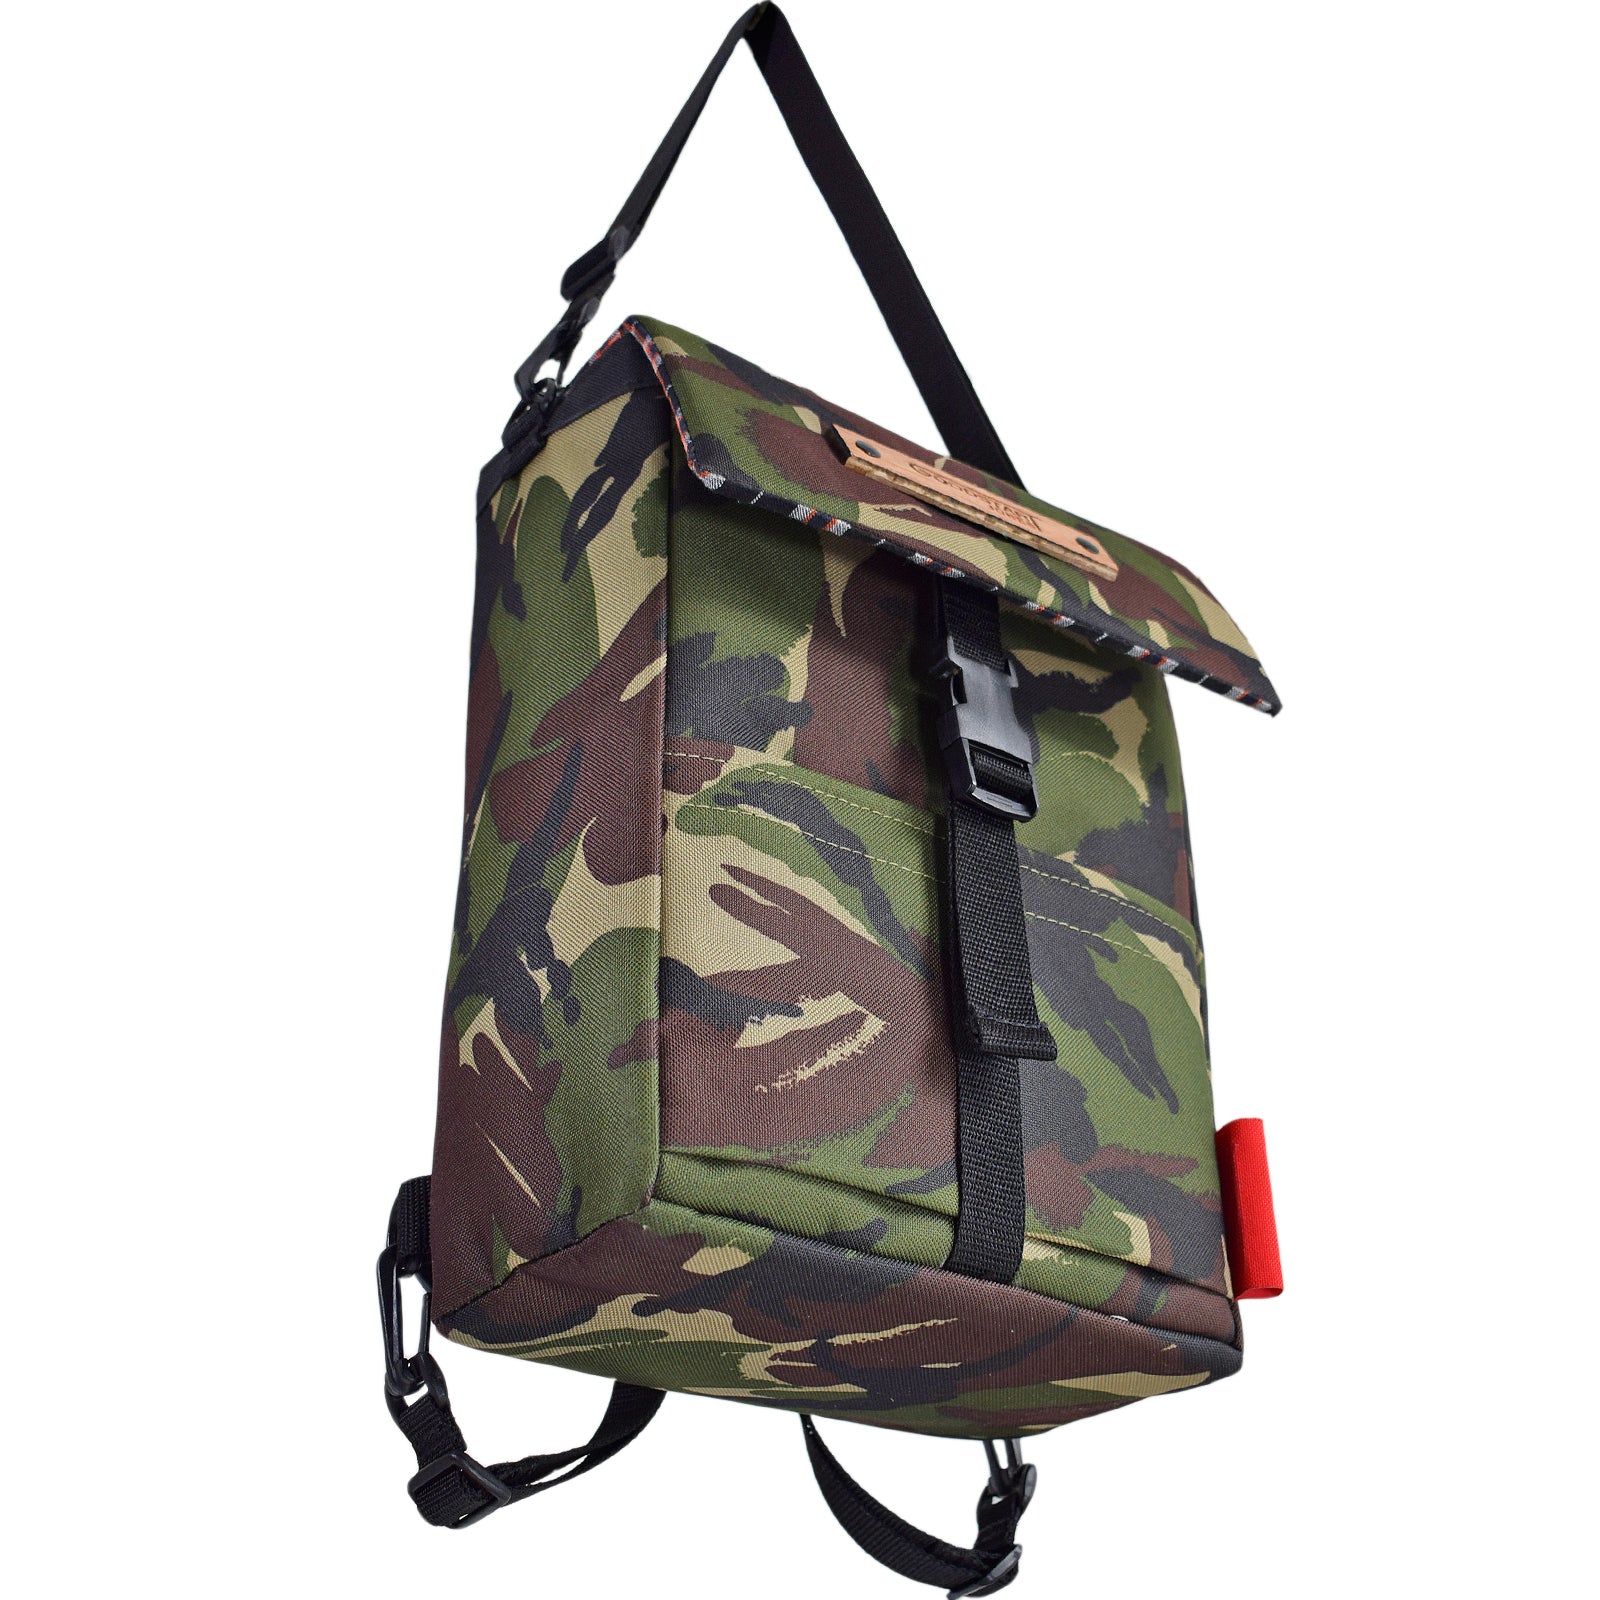   Green camo print backpack hung high with shoulder straps